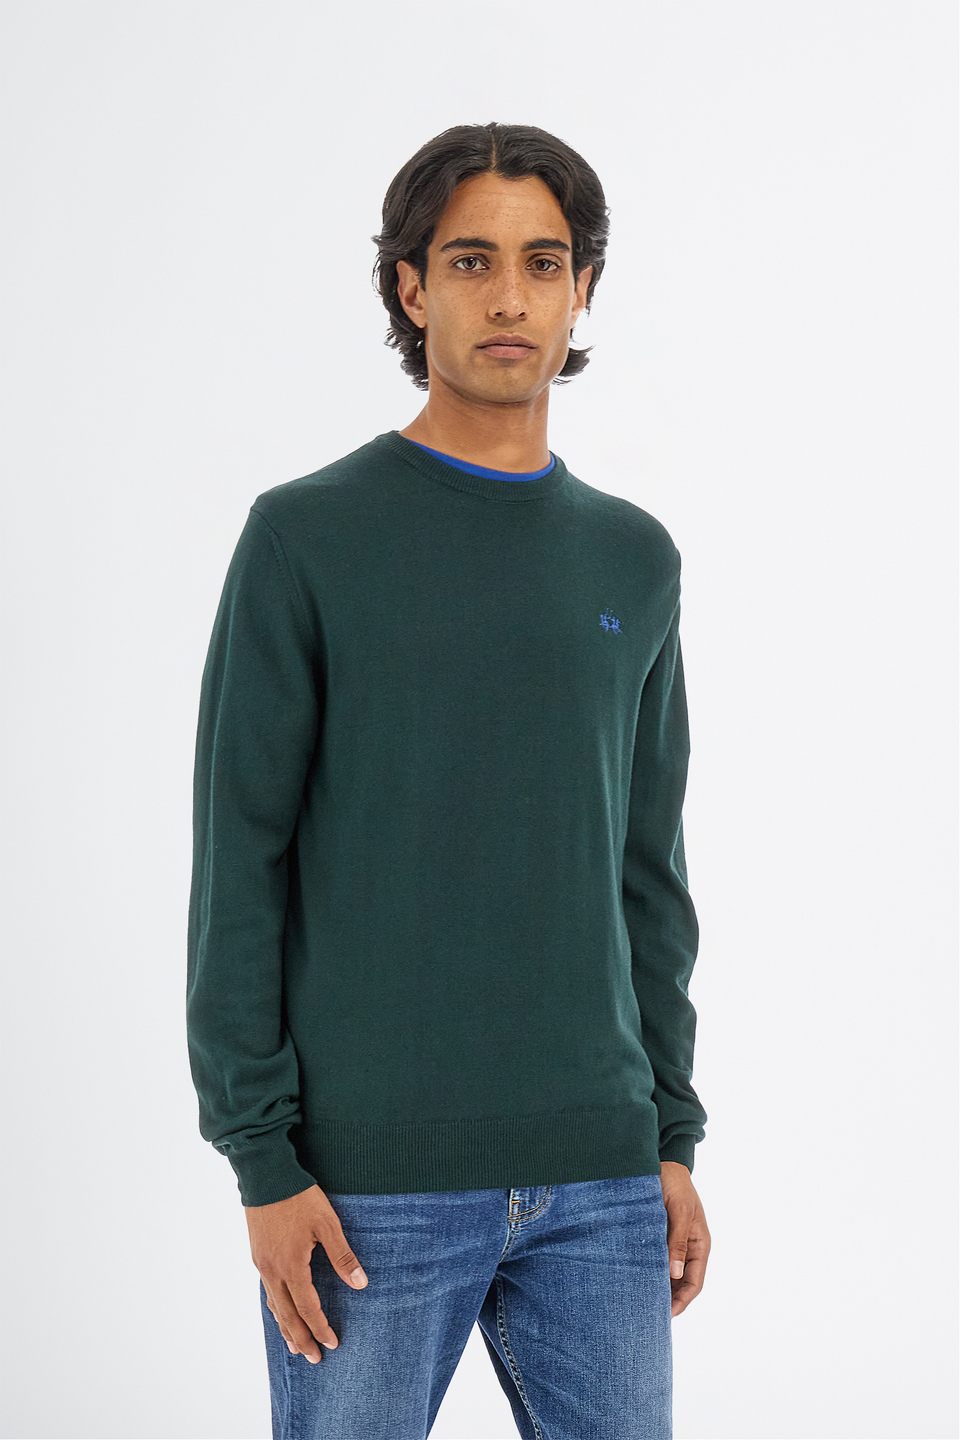 Men’s knitted sweater with long sleeves in cotton and wool blend regular fit | La Martina - Official Online Shop